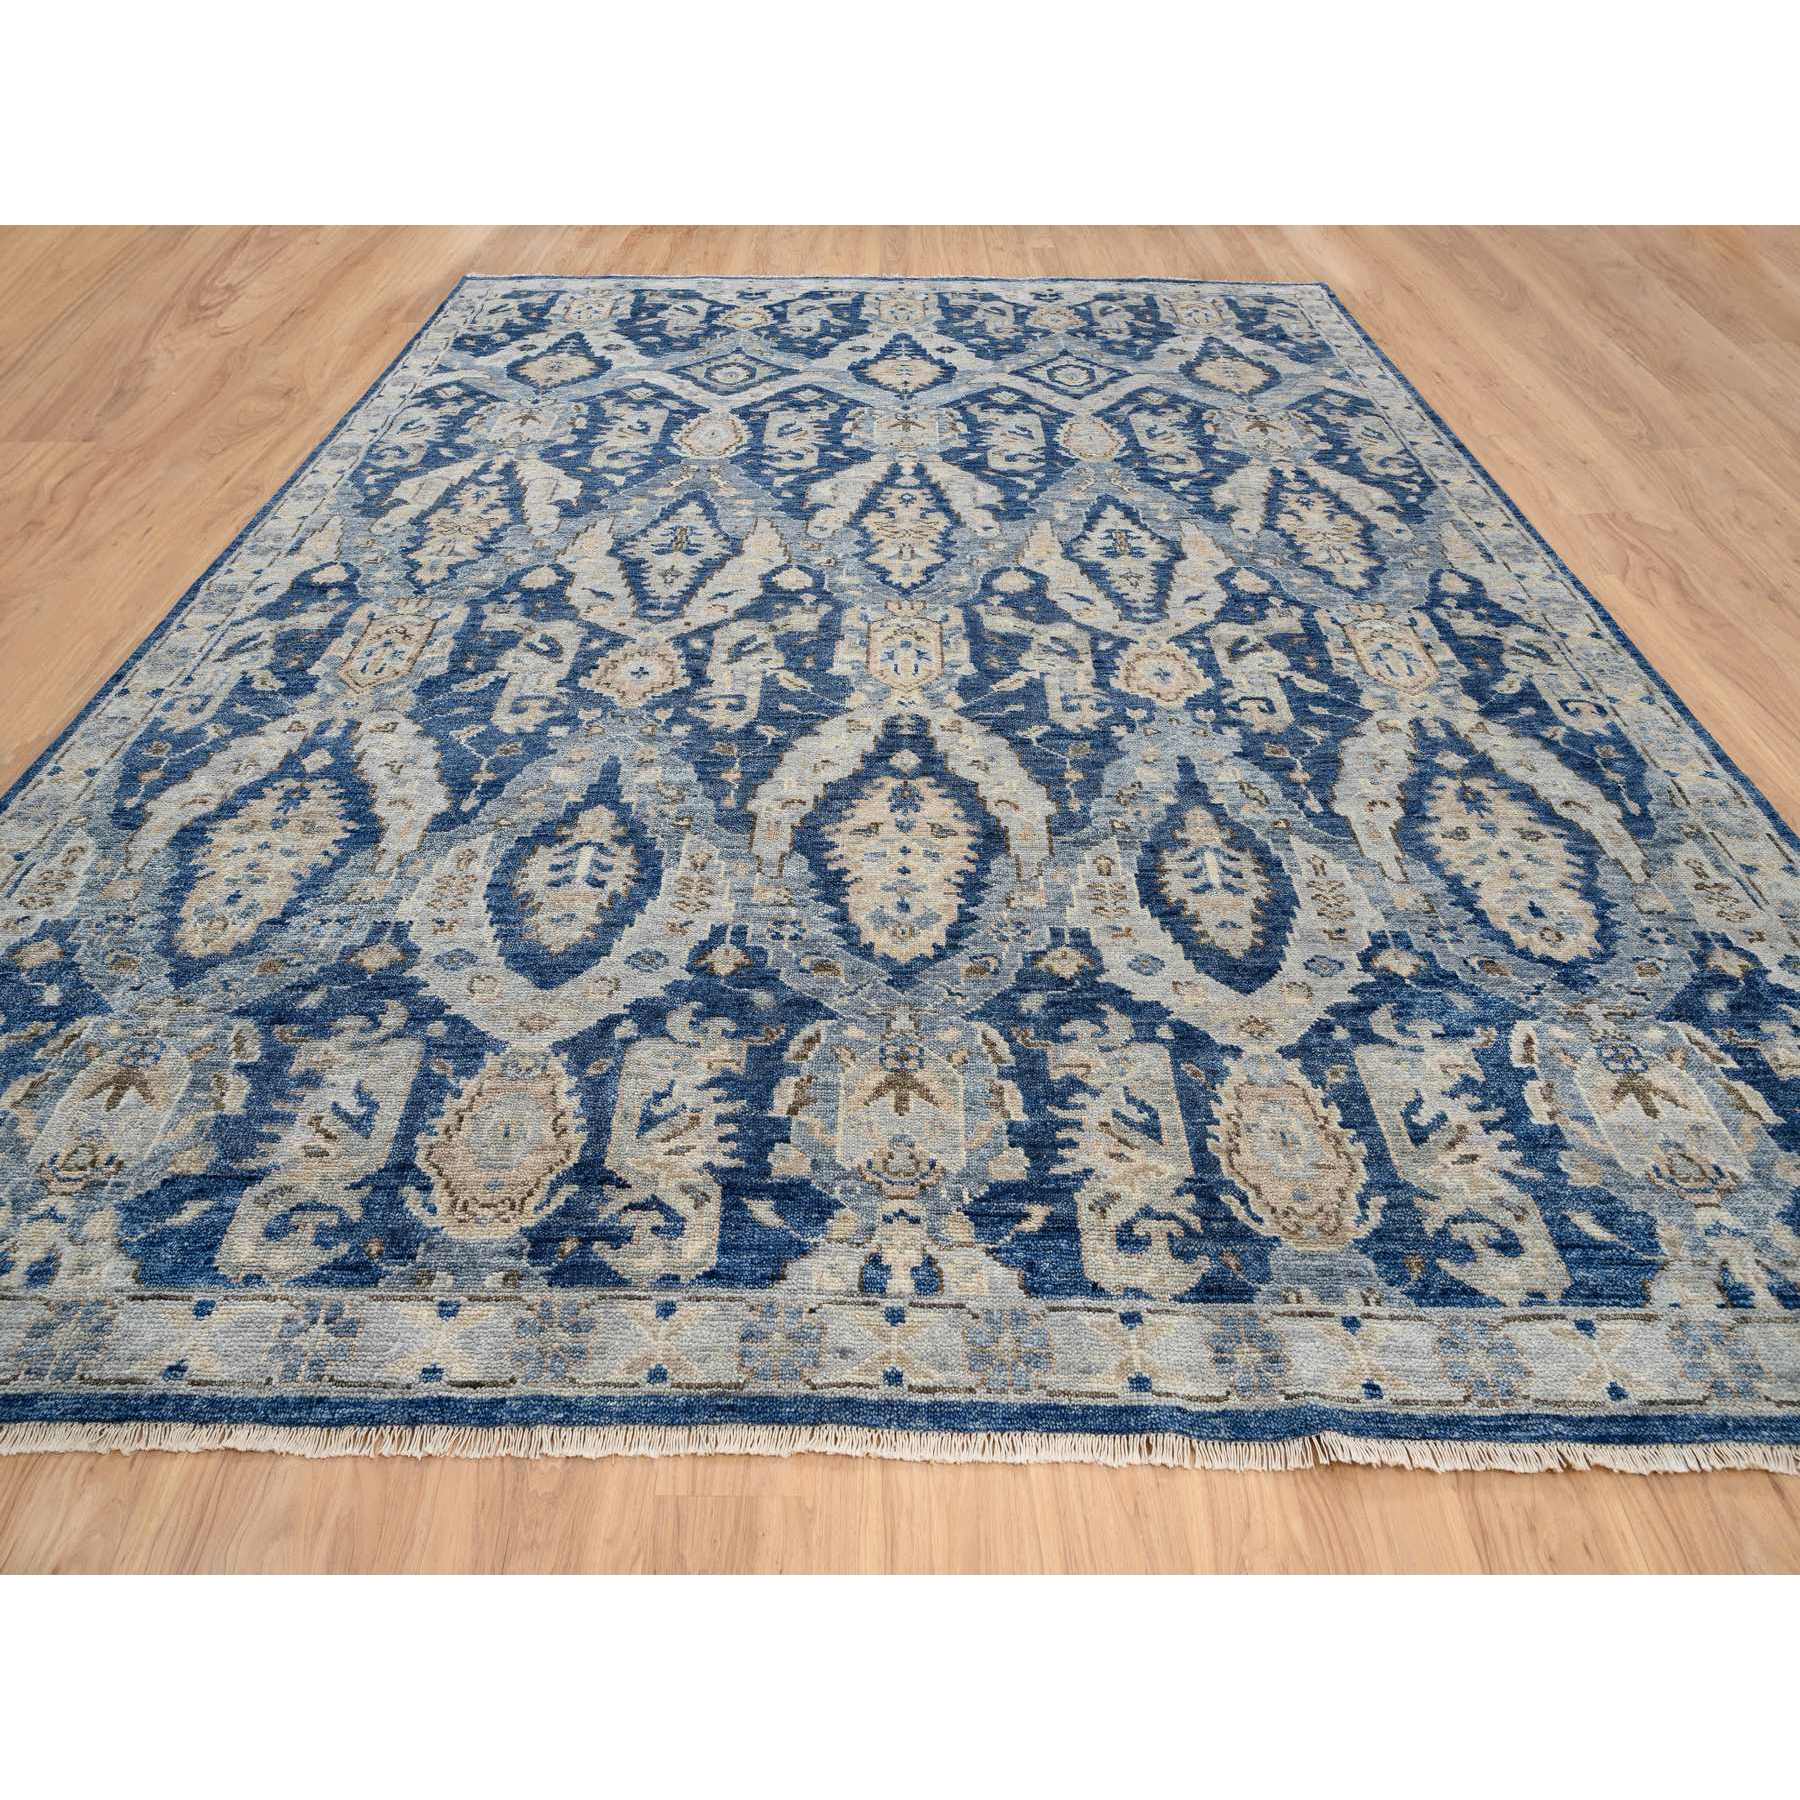 11'10"x14'9" Navy Blue, Hand Woven Oushak with a Serrated Reversed Leaf Design, Pure Wool Supple Collection, Oversized Oriental Rug 